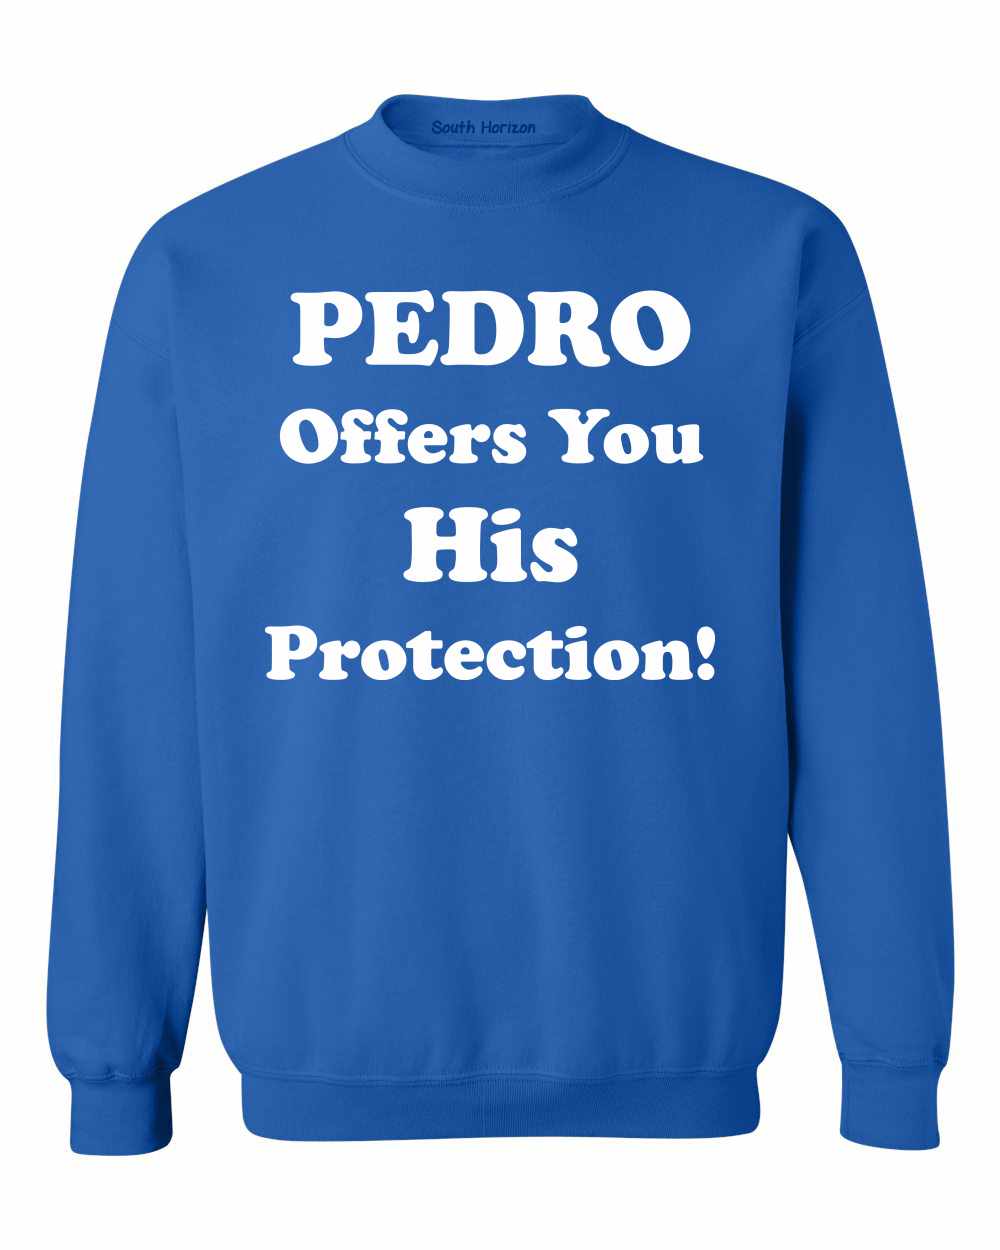 PEDRO OFFERS YOU HIS PROTECTION on SweatShirt (#385-11)